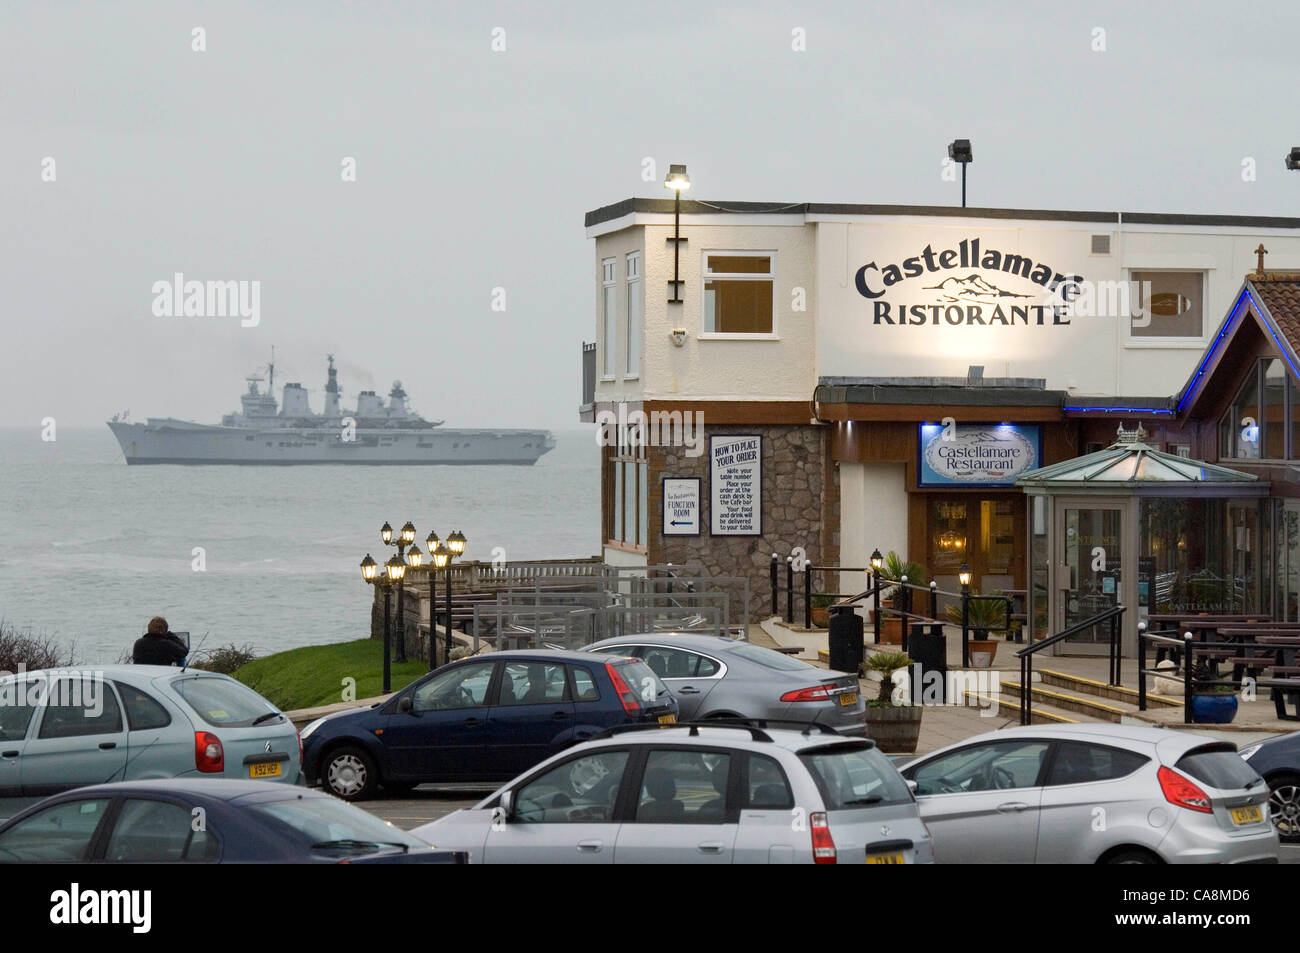 The Invincible-class light aircraft carrier -  Royal Navy - HMS Illustrious lays anchor off the coast of Swansea on 3rd December 2011 with Castellamare restaurant in Bracelet Bay in the foreground. Stock Photo